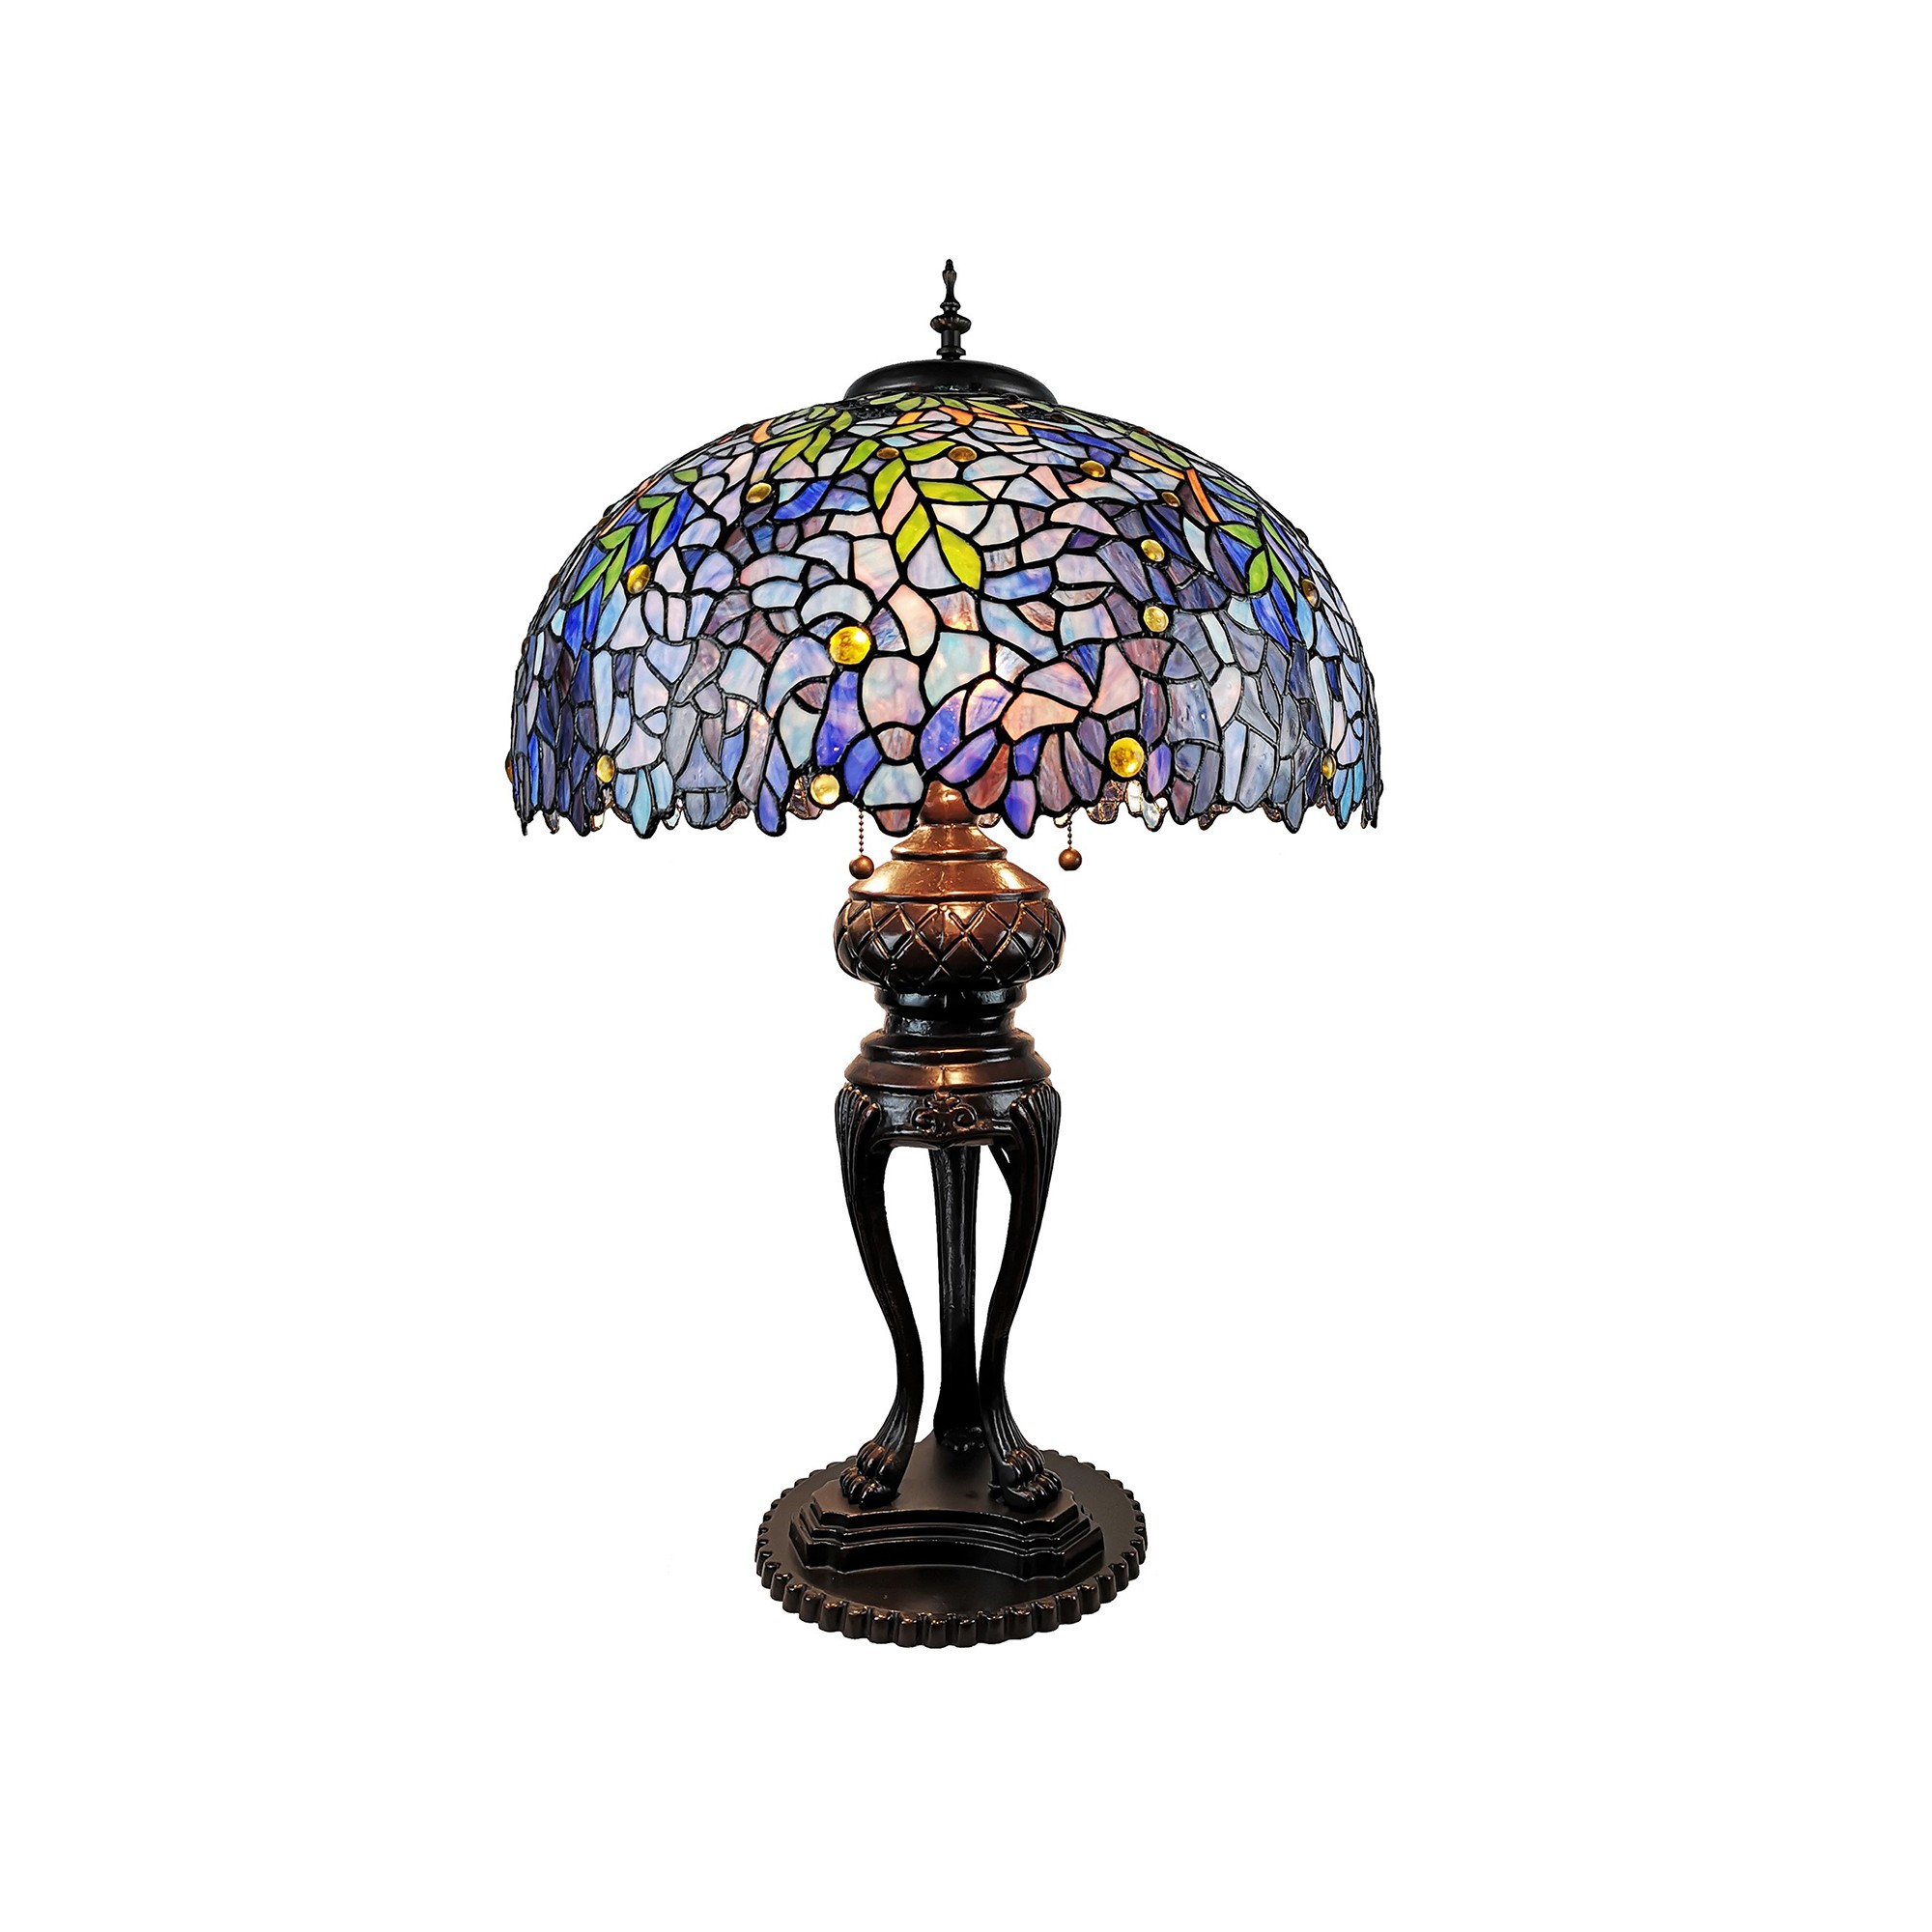 Glacy 20-inch Wisteria Design Stained Glass/Bronze Tiffany-Style Table Lamp